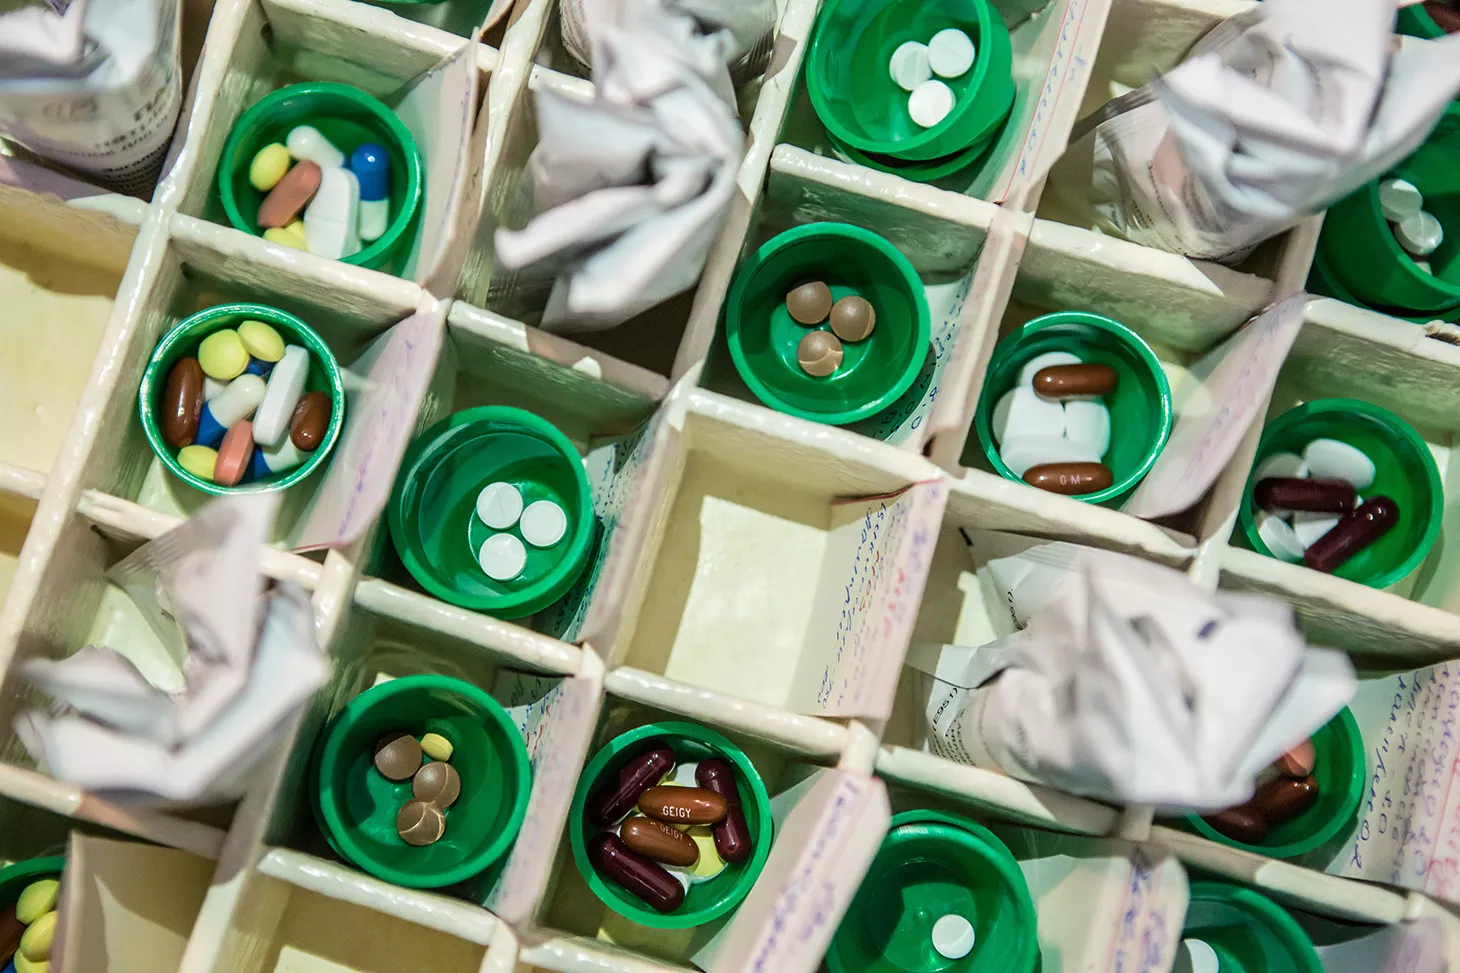 Pills are prepared separately for each patient by a nurse before being distributed to patients at the Zhytomyr Regional TB Dispensary.